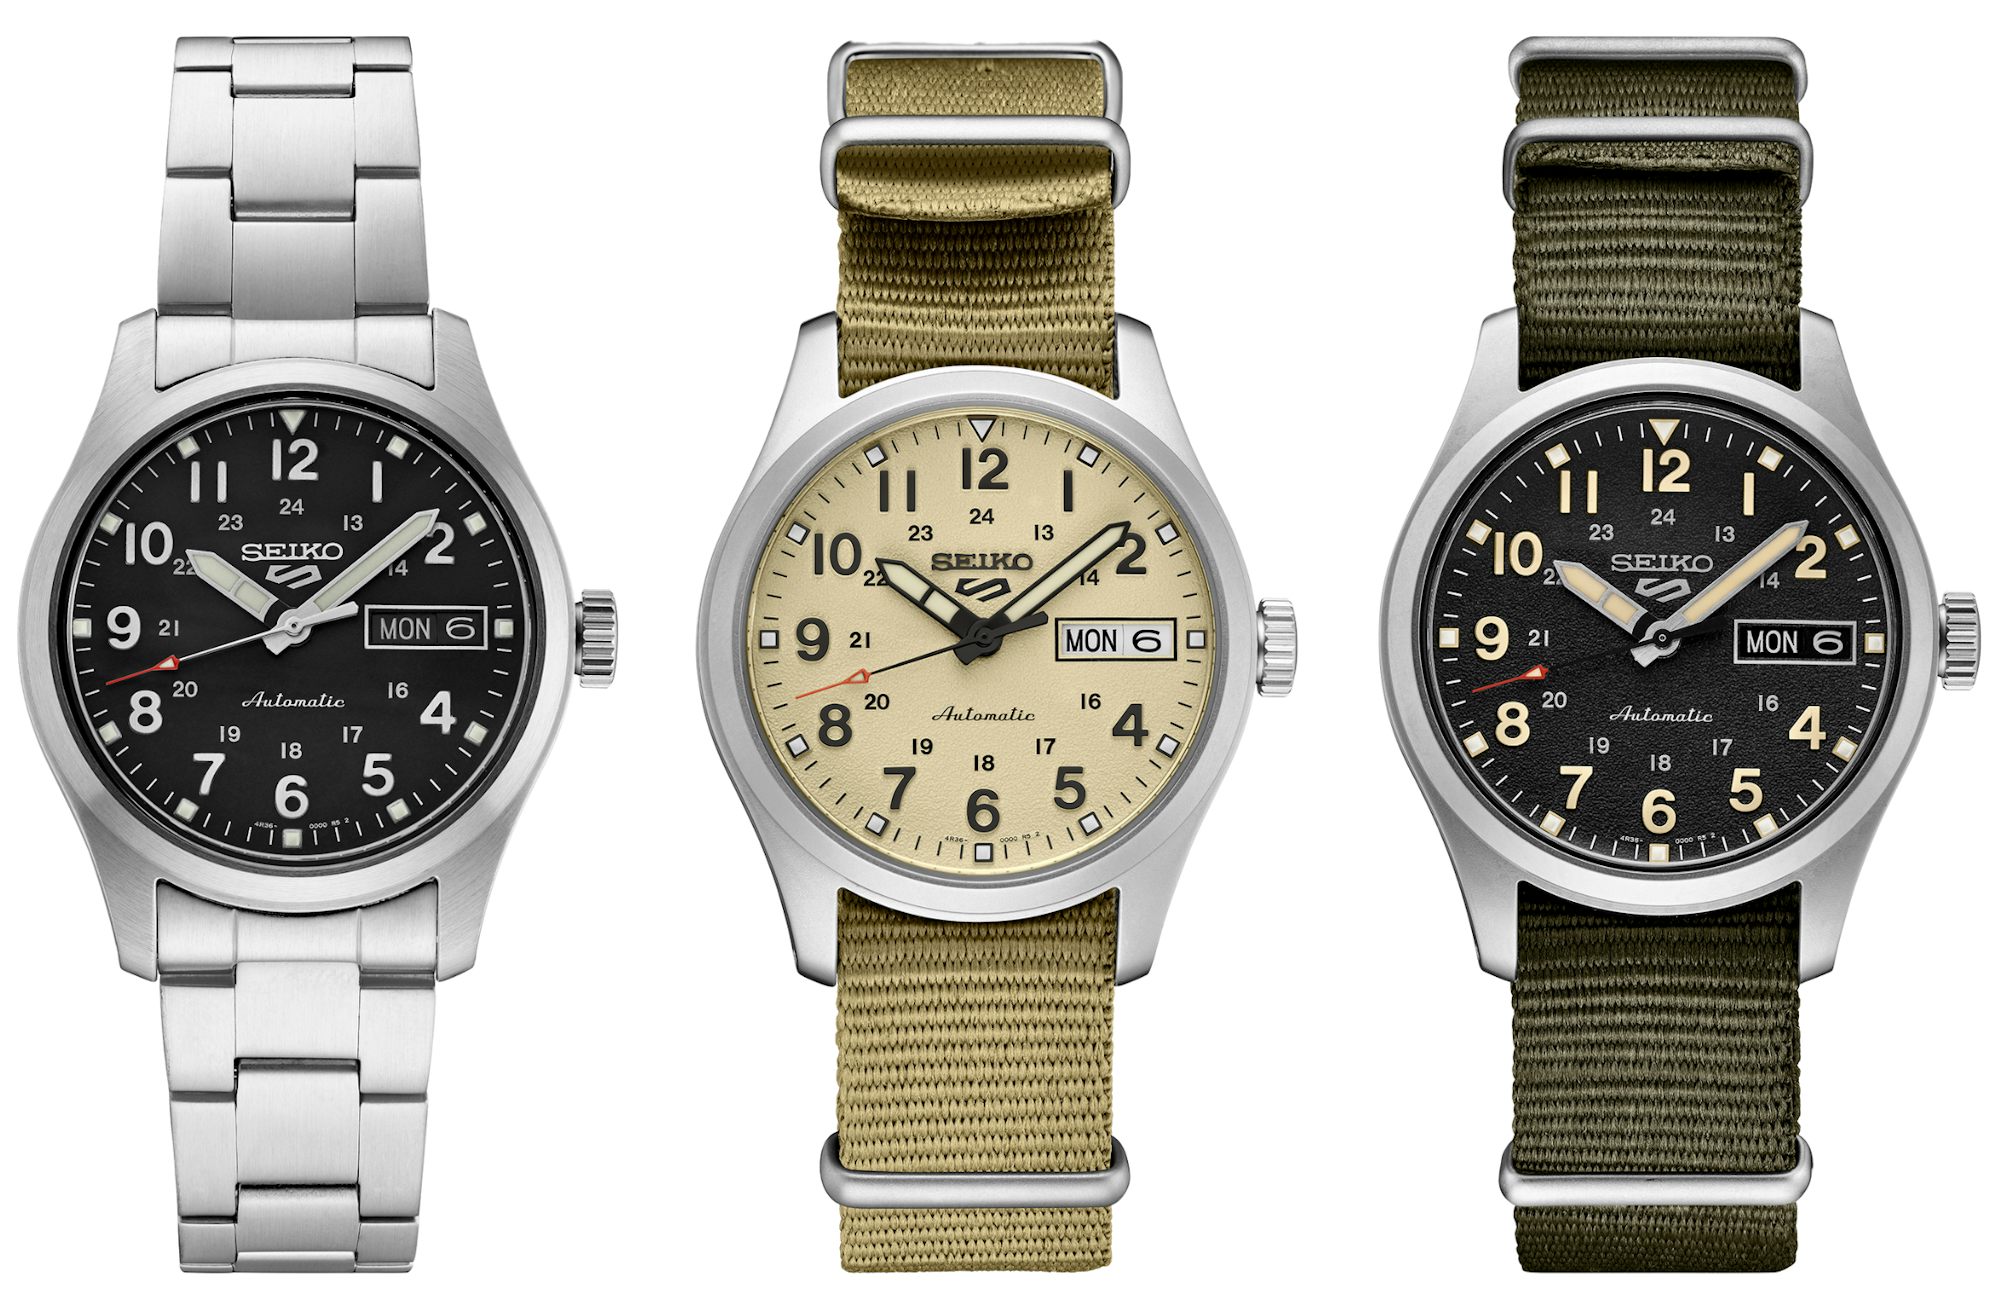 Introducing: They're Back! Seiko Brings A Series Of 36mm Field Watches ...